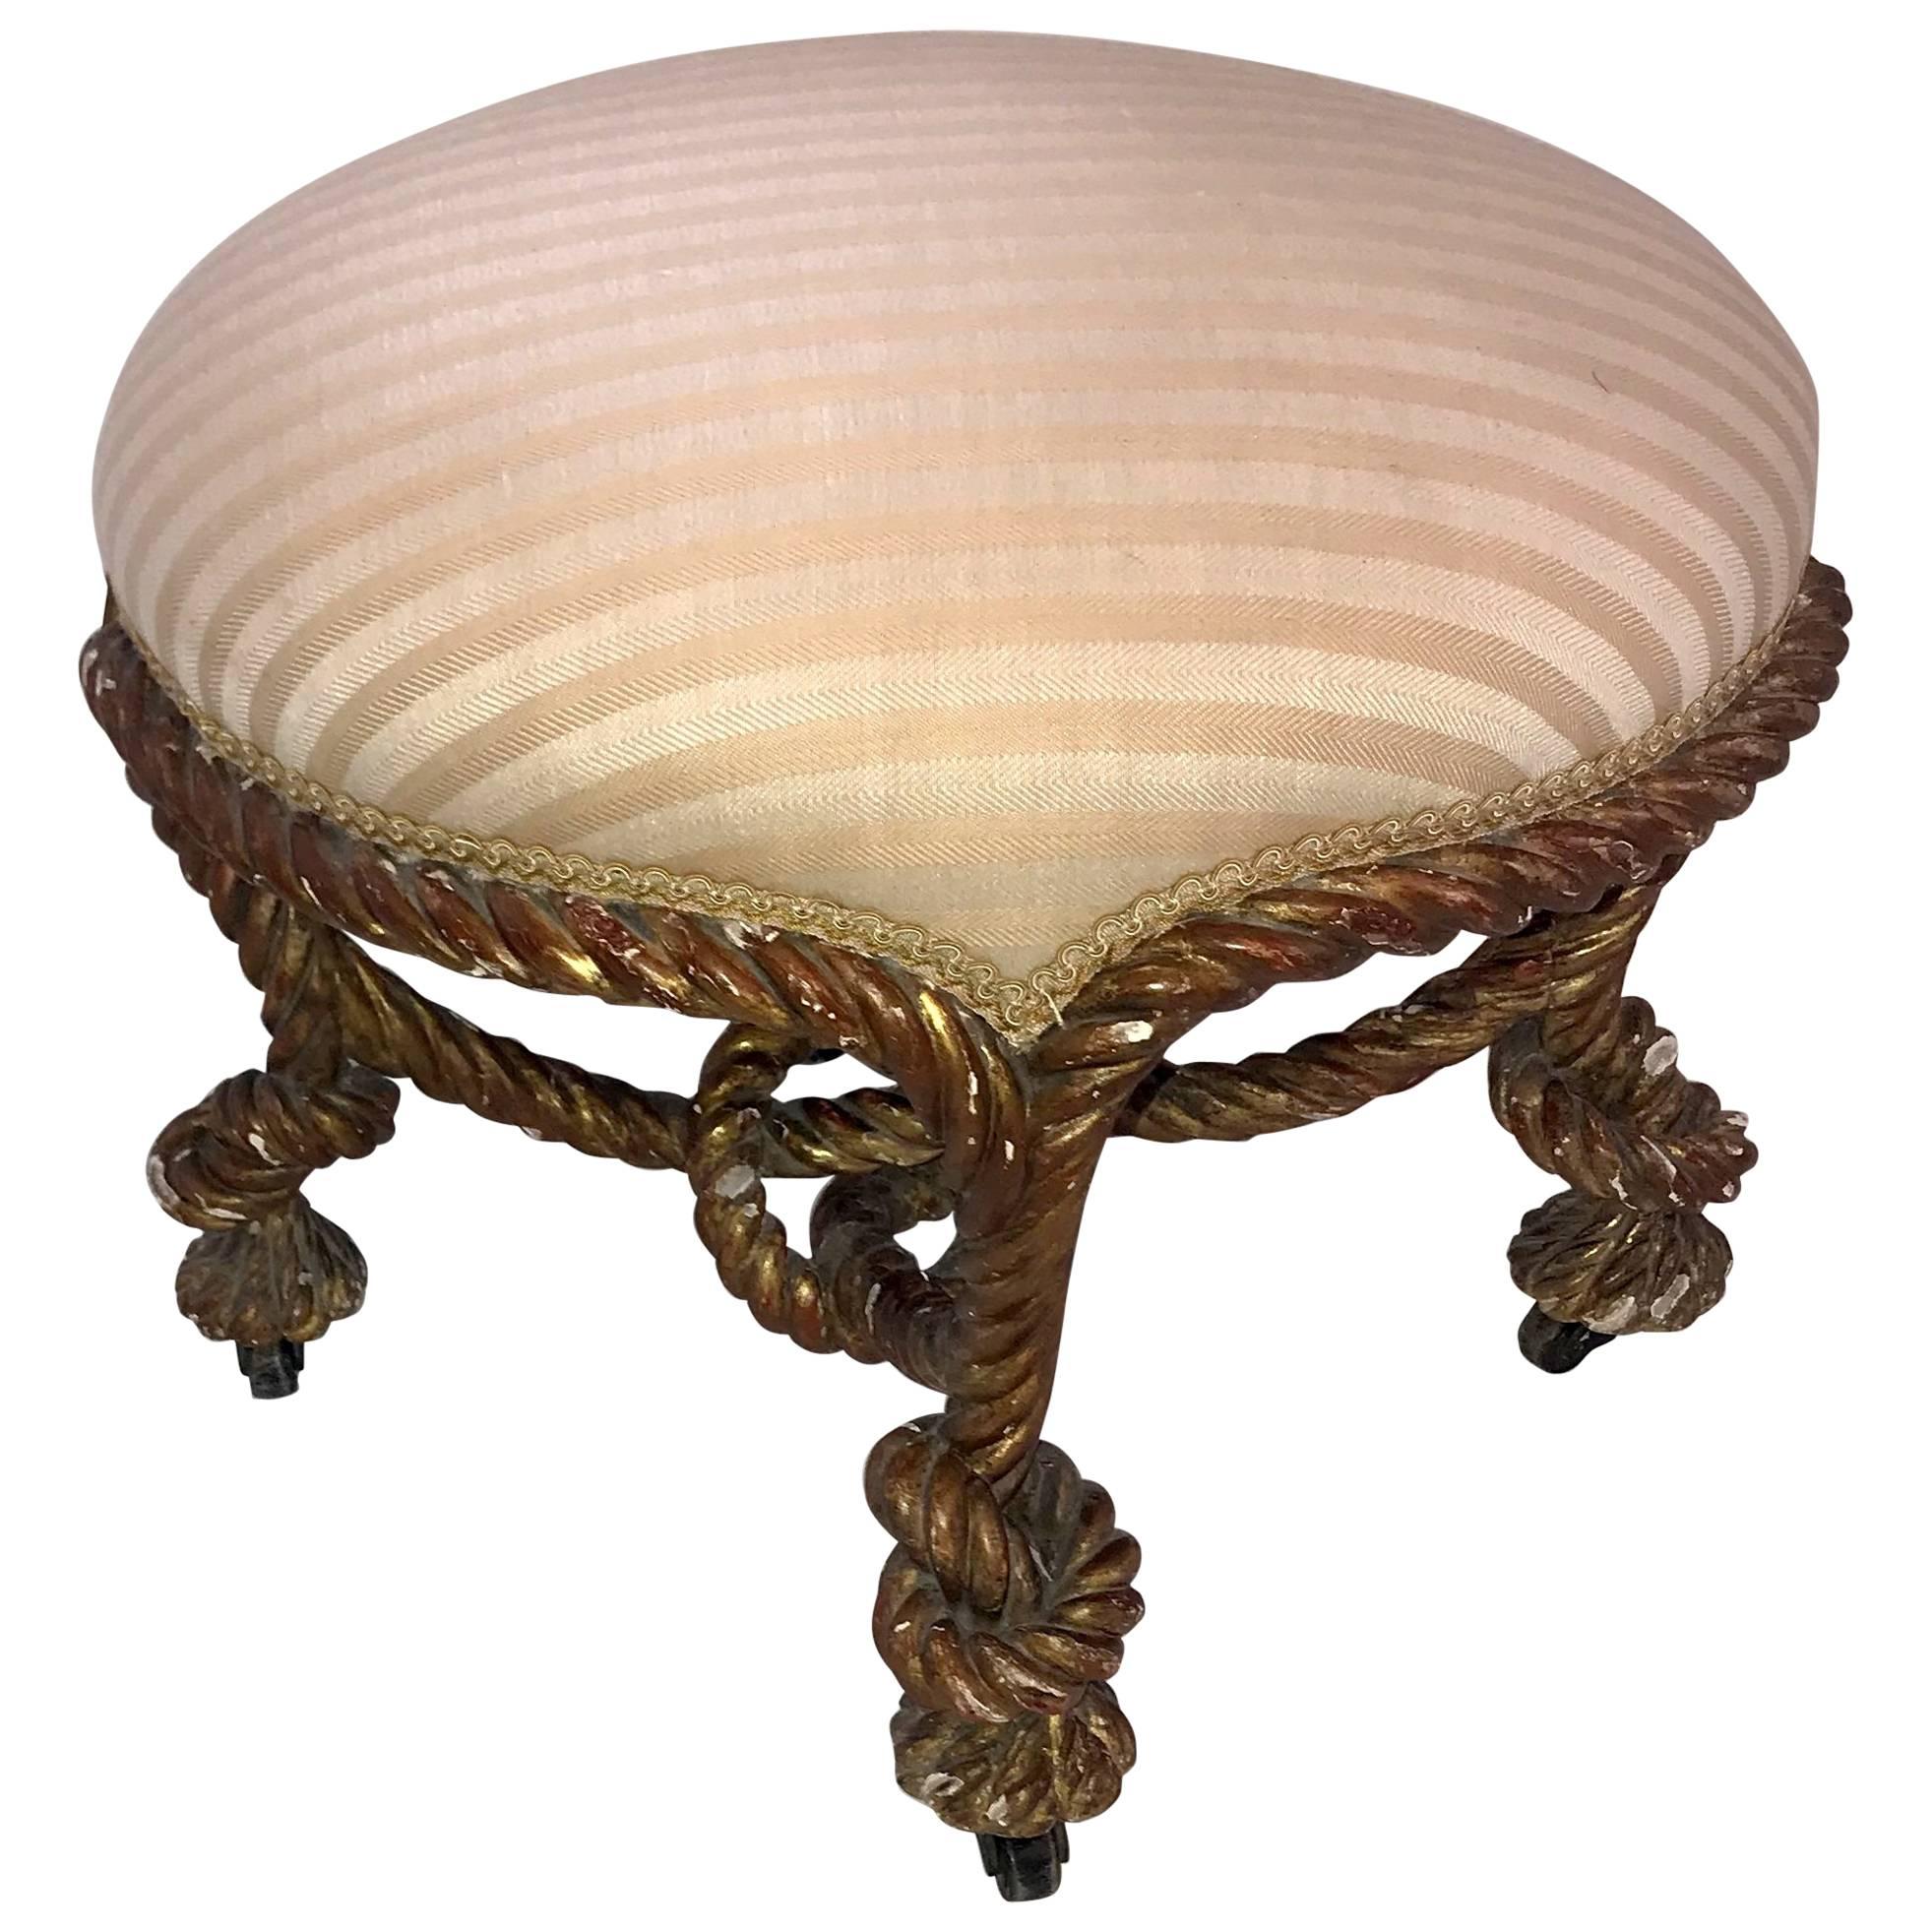 Wonderful French Giltwood Knotted Rope Round Ottoman Tabouret Silk Upholstery For Sale